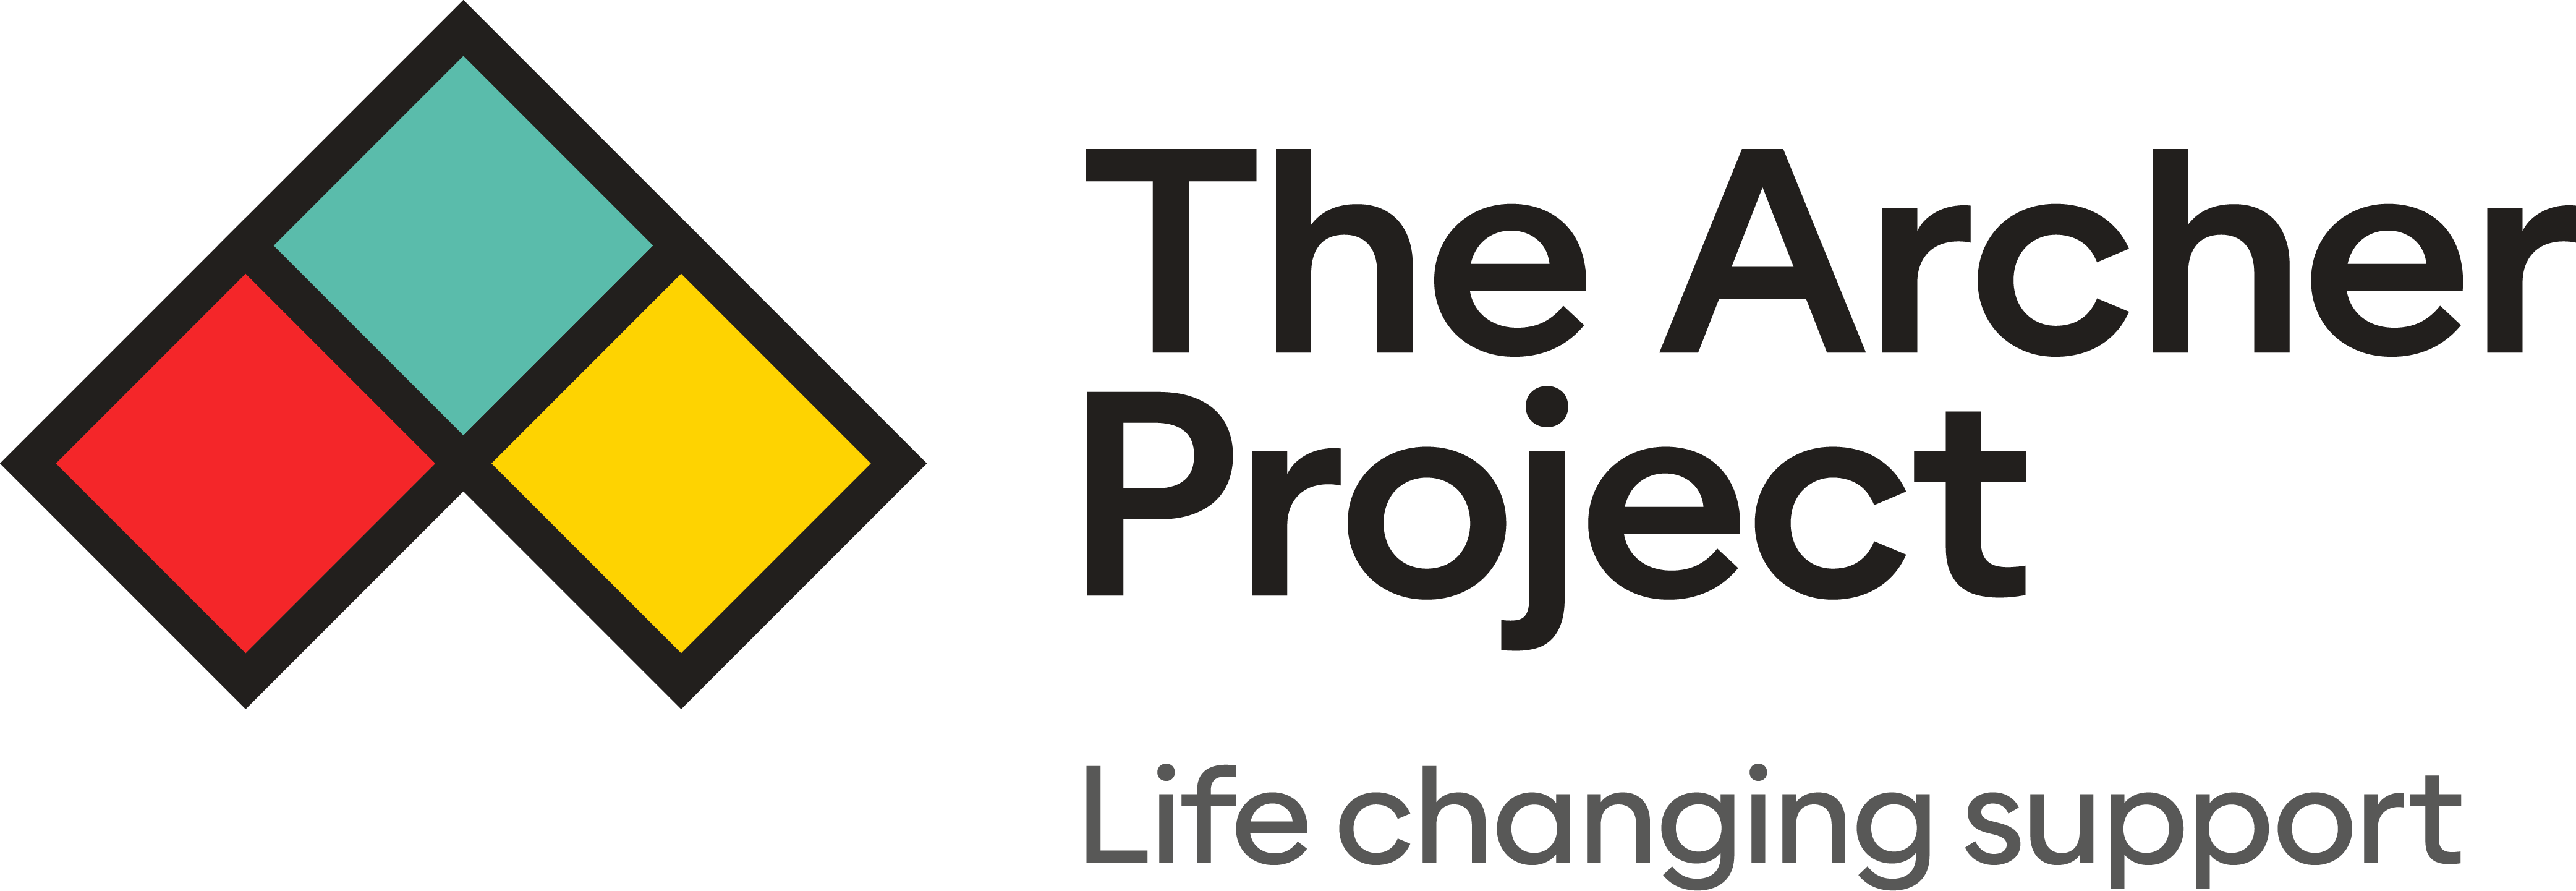 logo for The Archer Project